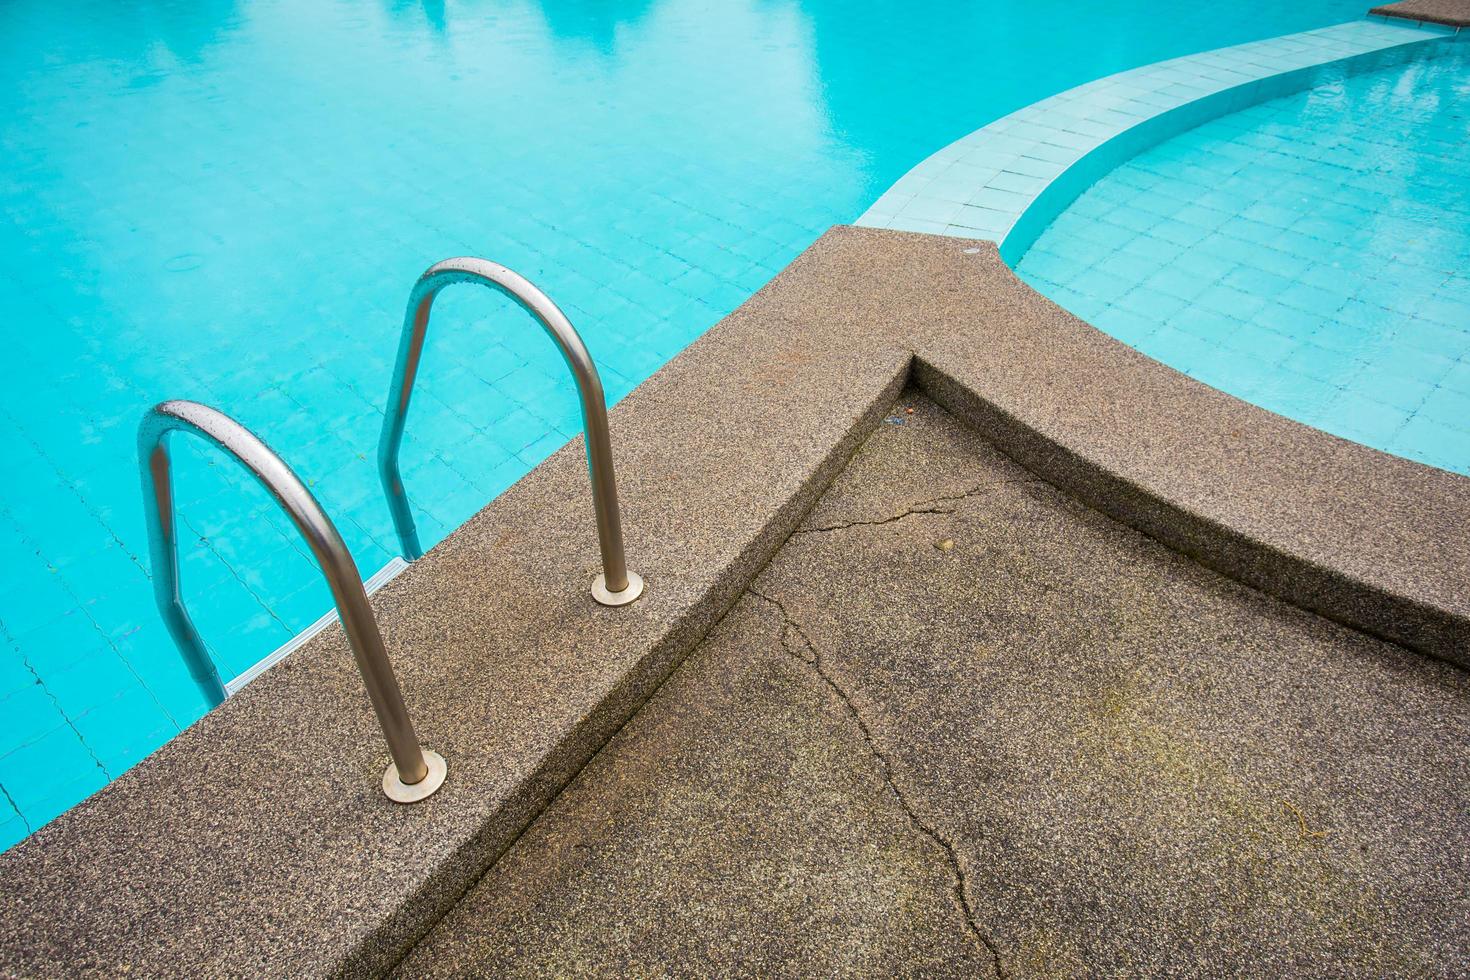 Swimming pool with stair at hotel close up photo